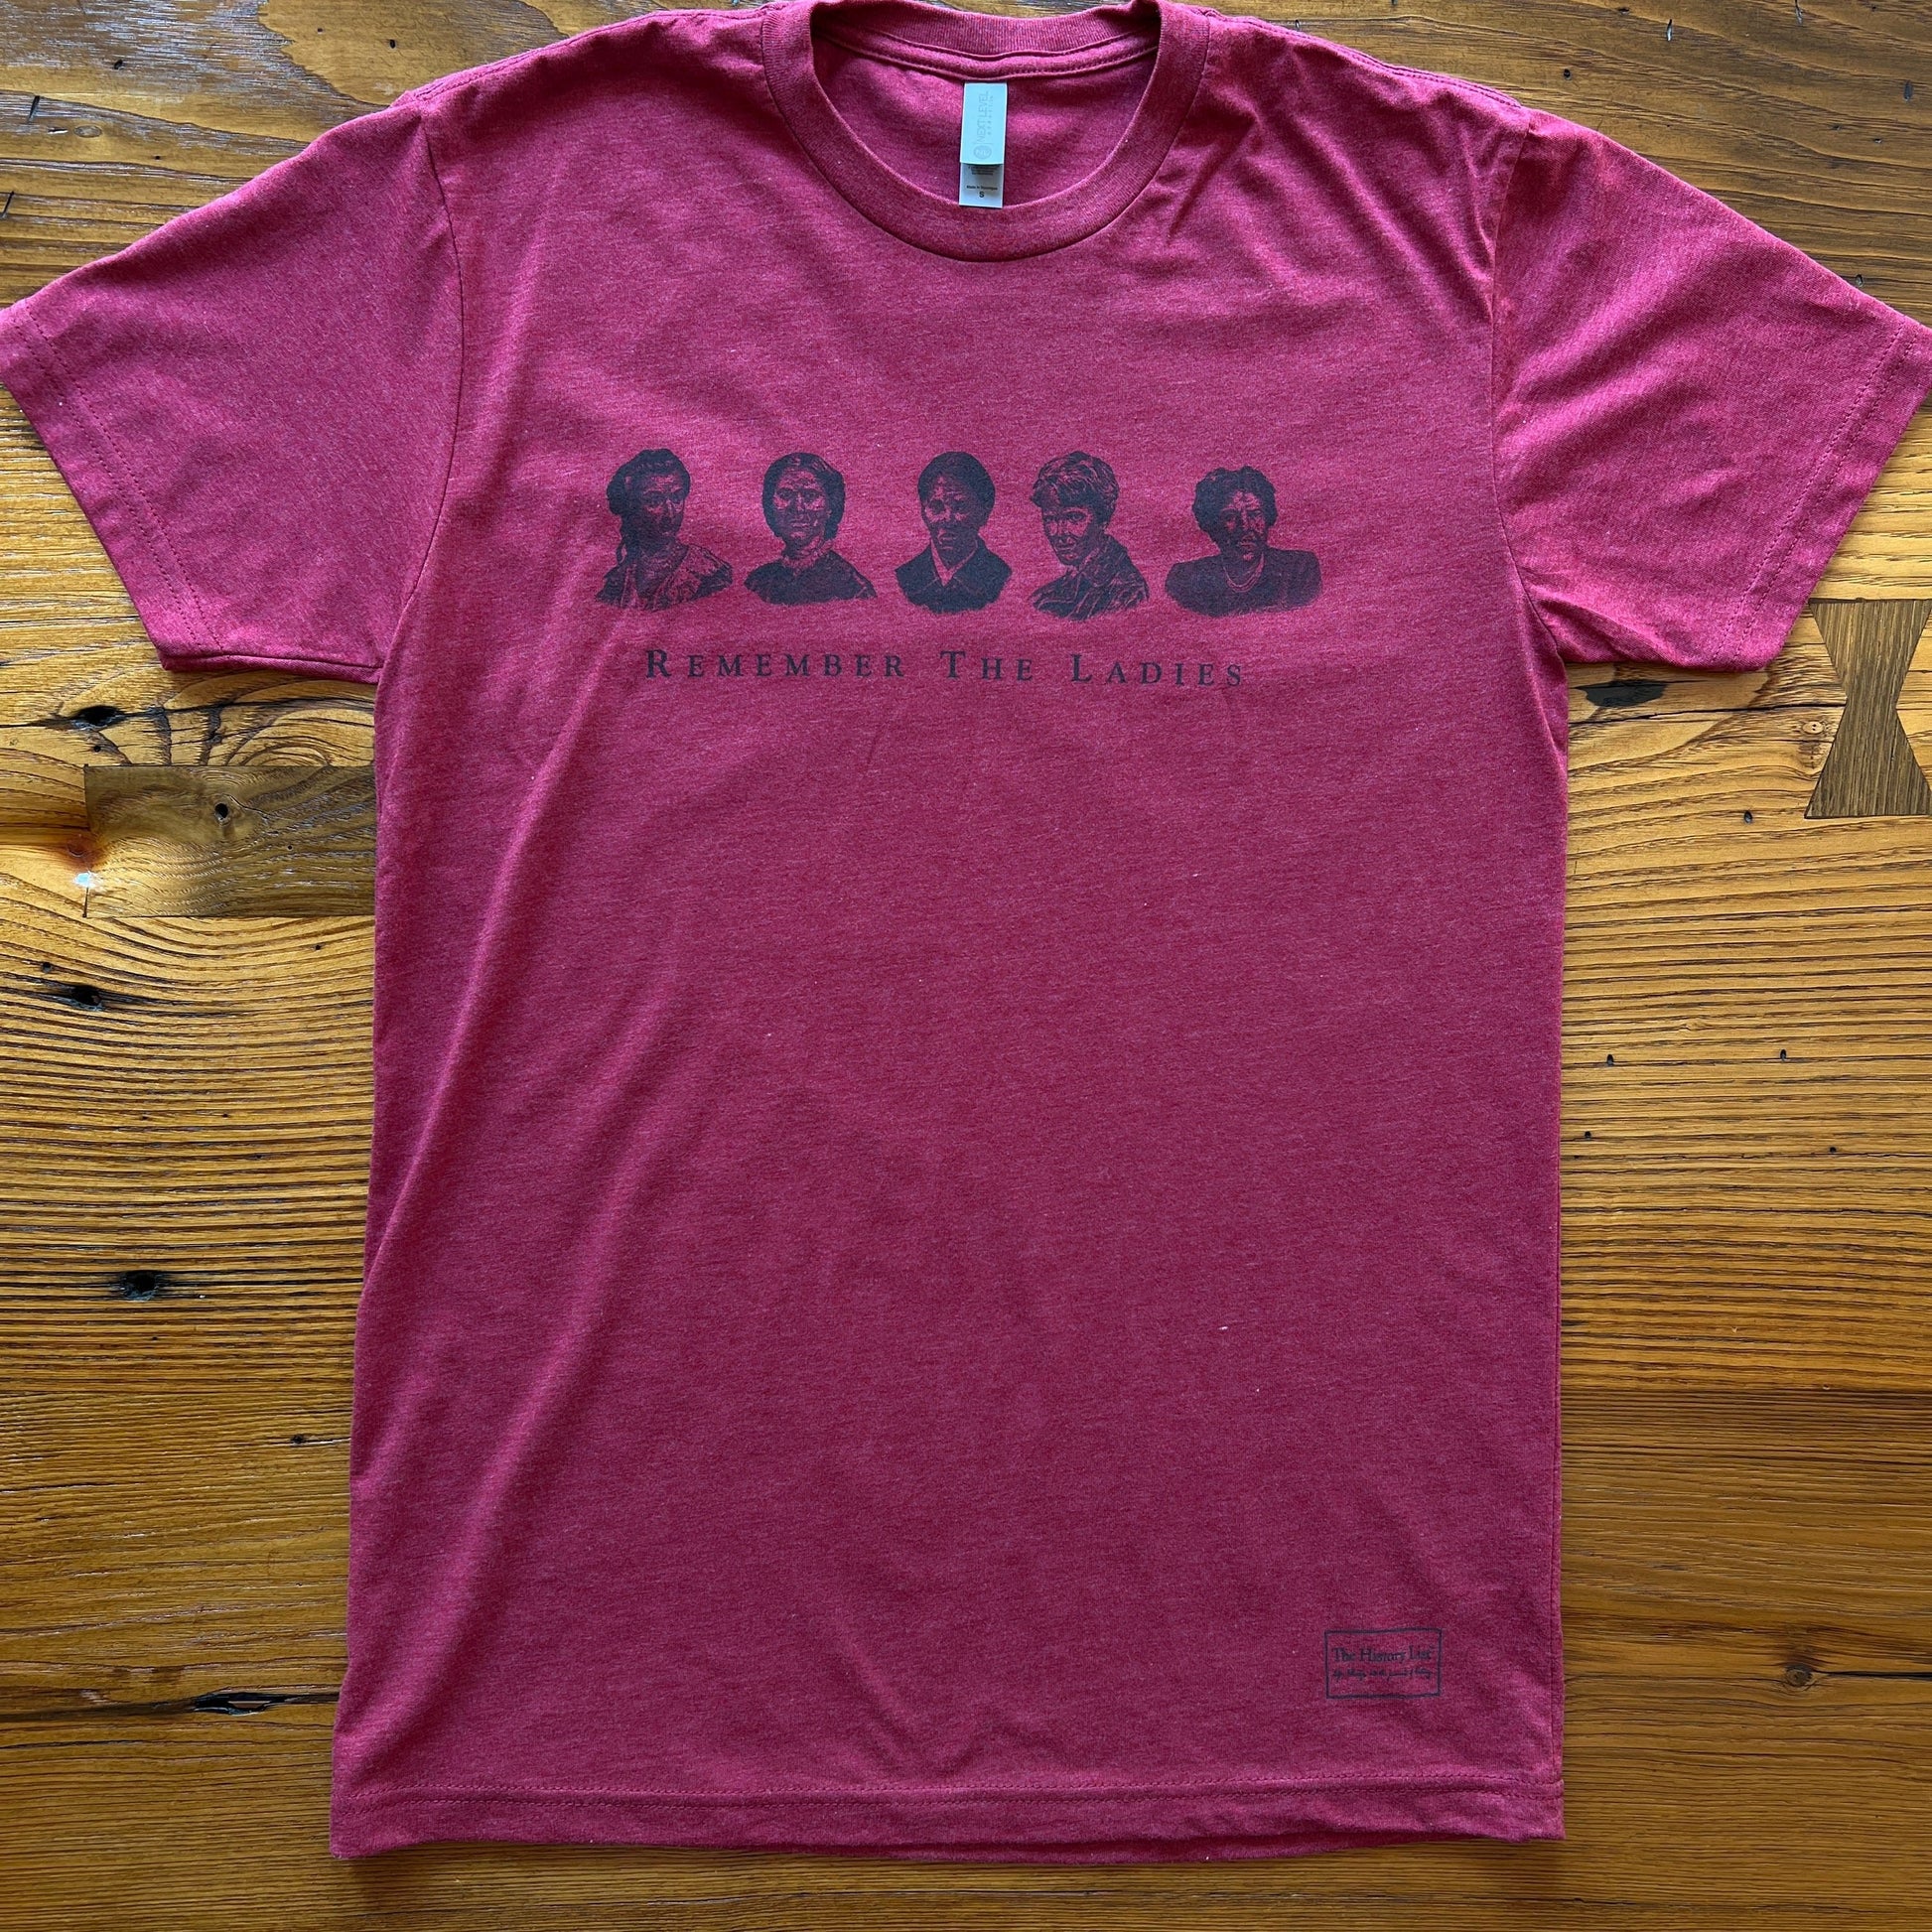 "Remember the Ladies" Shirt — Straight design from The History List Store in Cardinal